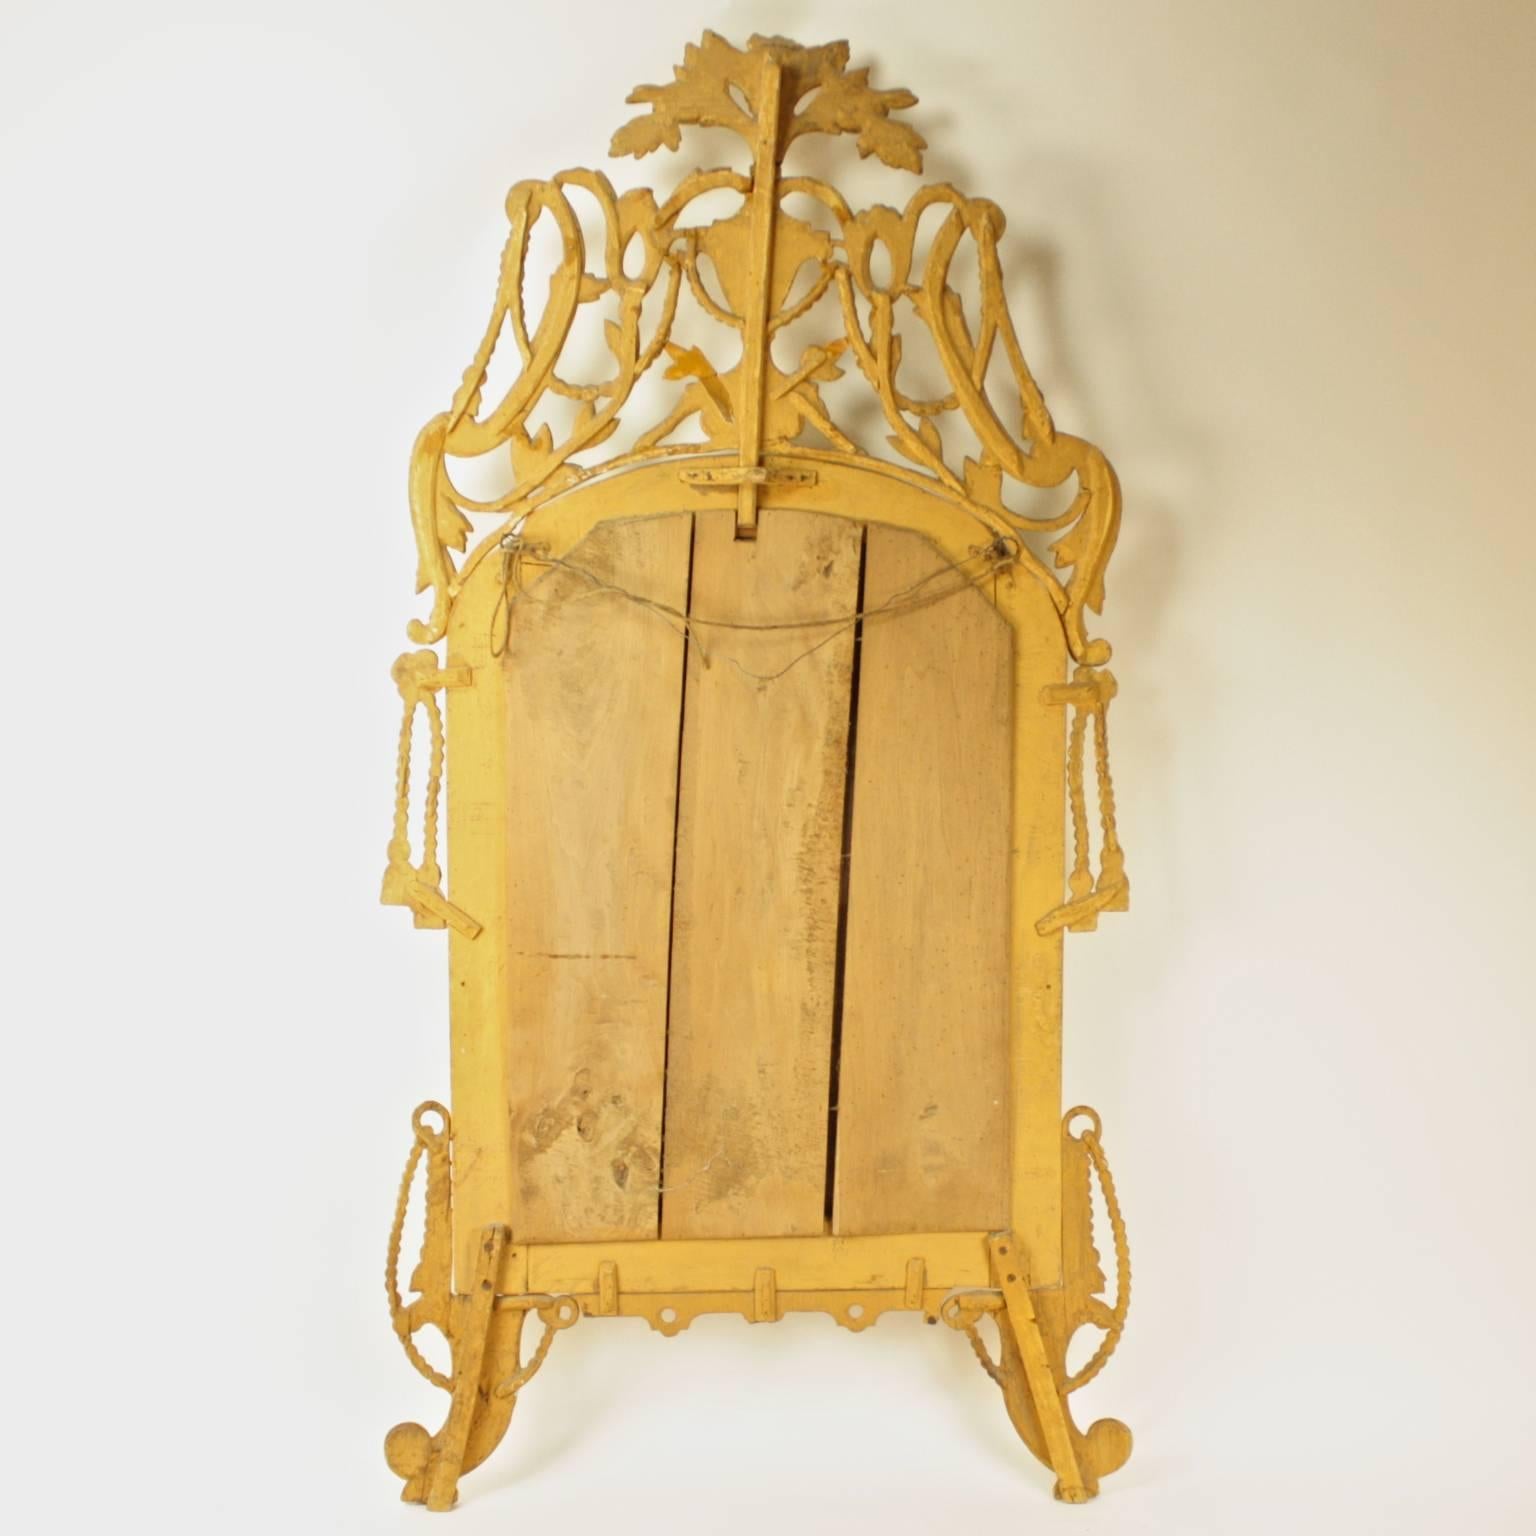 Large 18th Century Italian Rope & Tassels Decoration Carved Giltwood Mirror In Good Condition For Sale In Berlin, DE